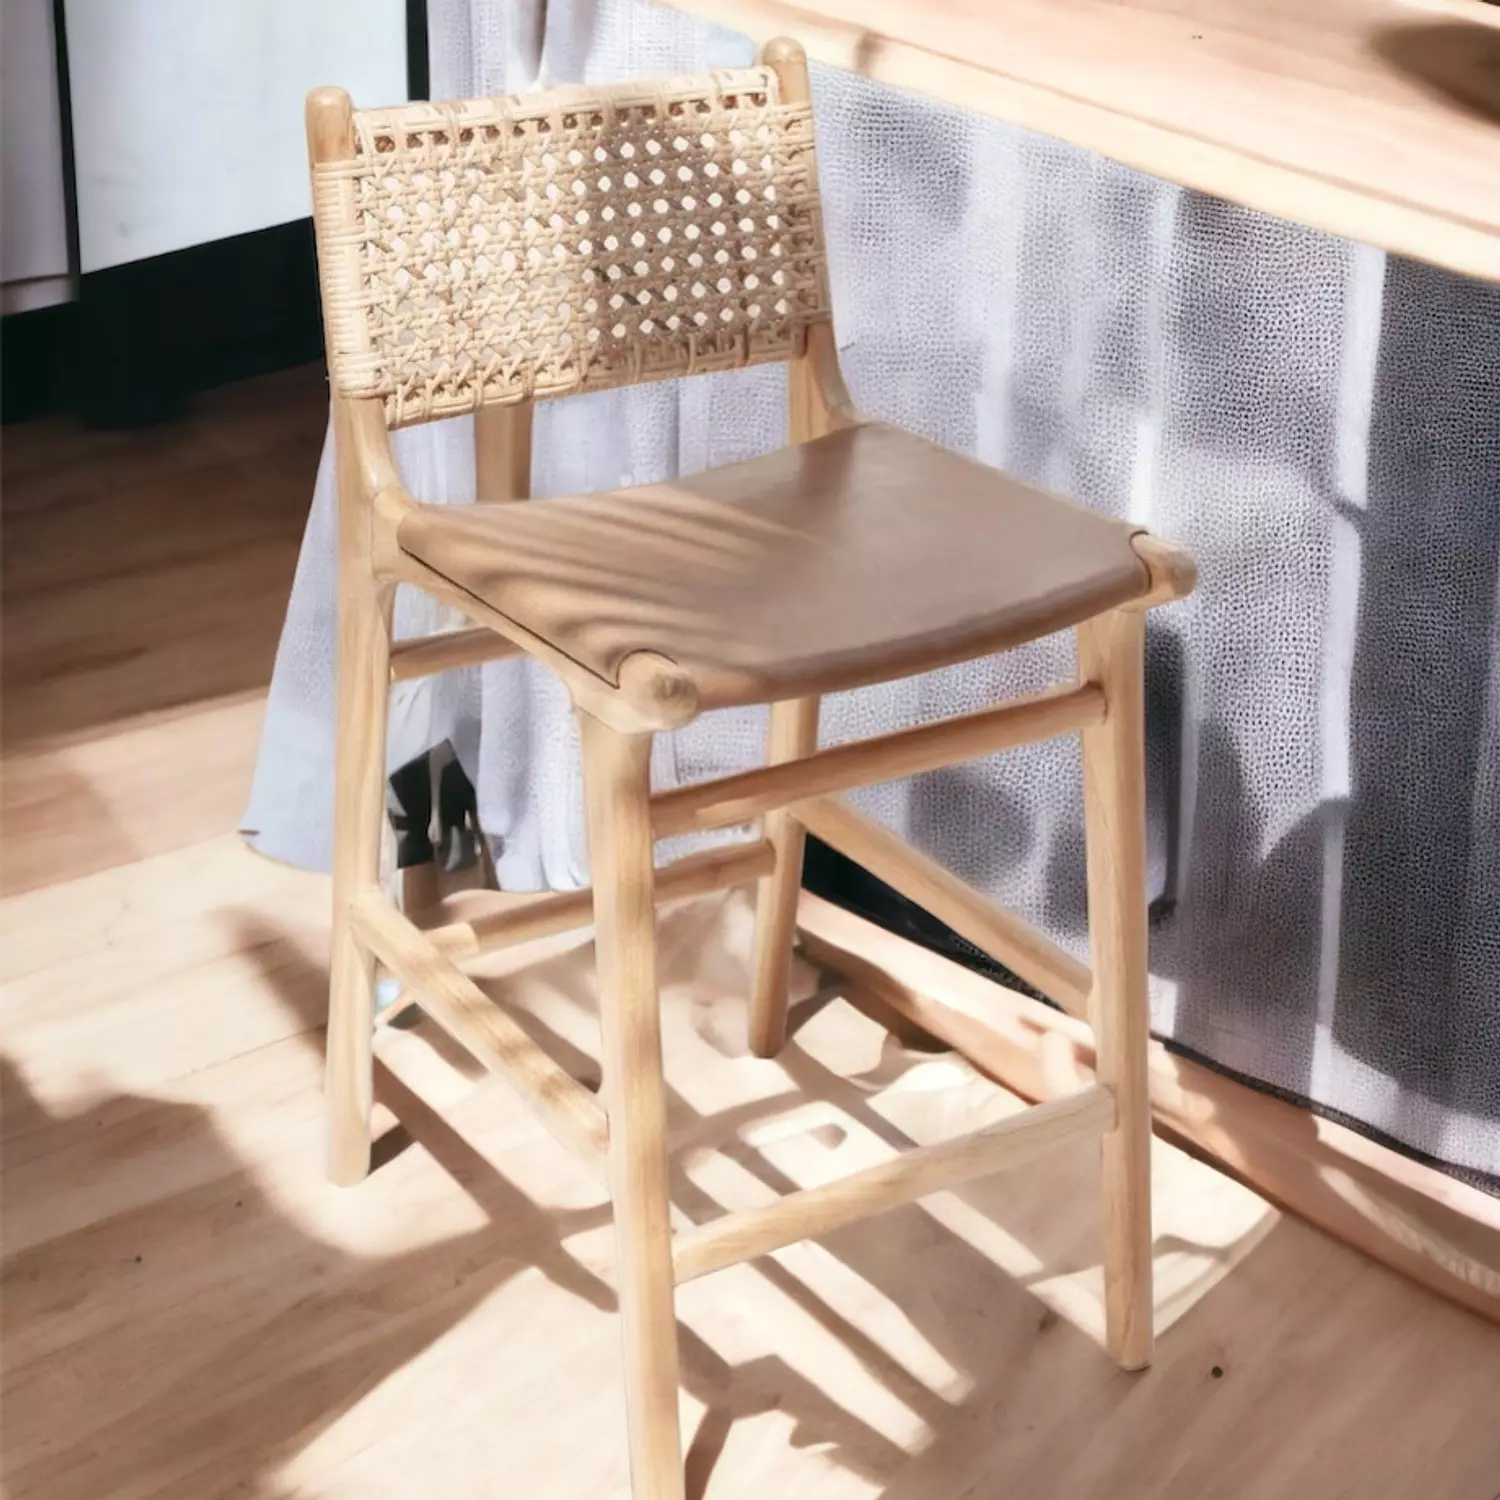 Wovy high chair hover image